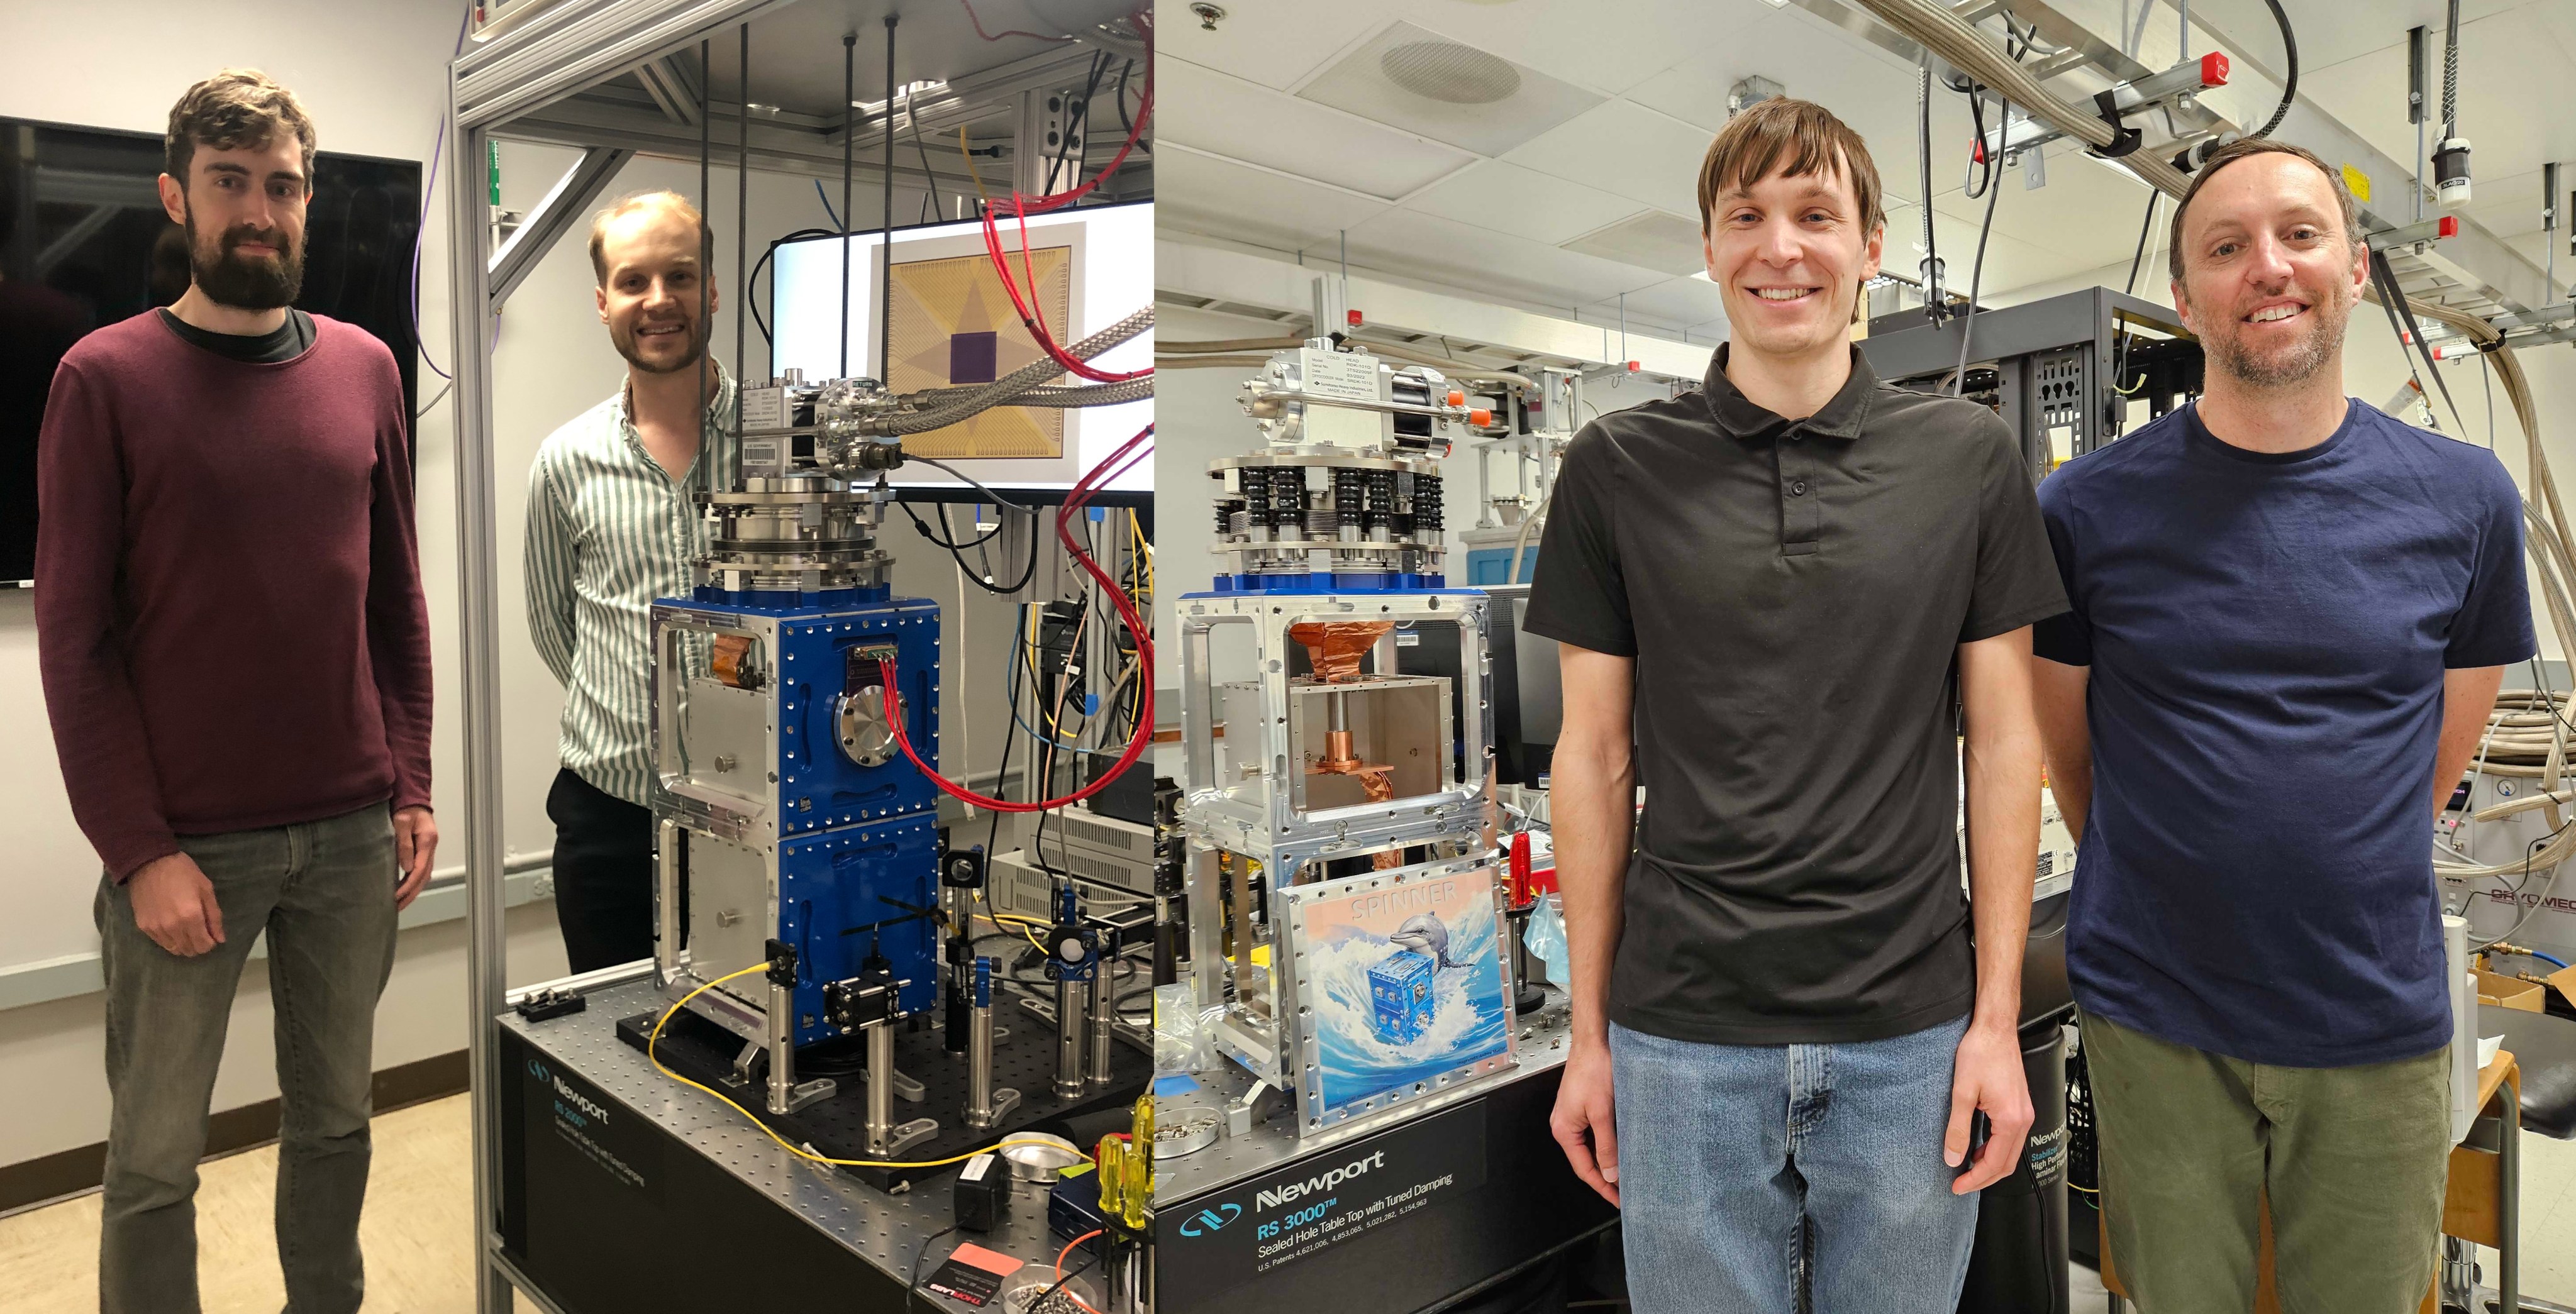 Two pictures showing JPL staff members standing next to their lab equipment. On the left, two of the JPL staff stand in a laboratory behind a cubic blue cryocooler. On the right, two more JPL staff stand in front of an optical table which holds a similar cubic cryocooler with its sides removed, exposing the copper and steel interior.